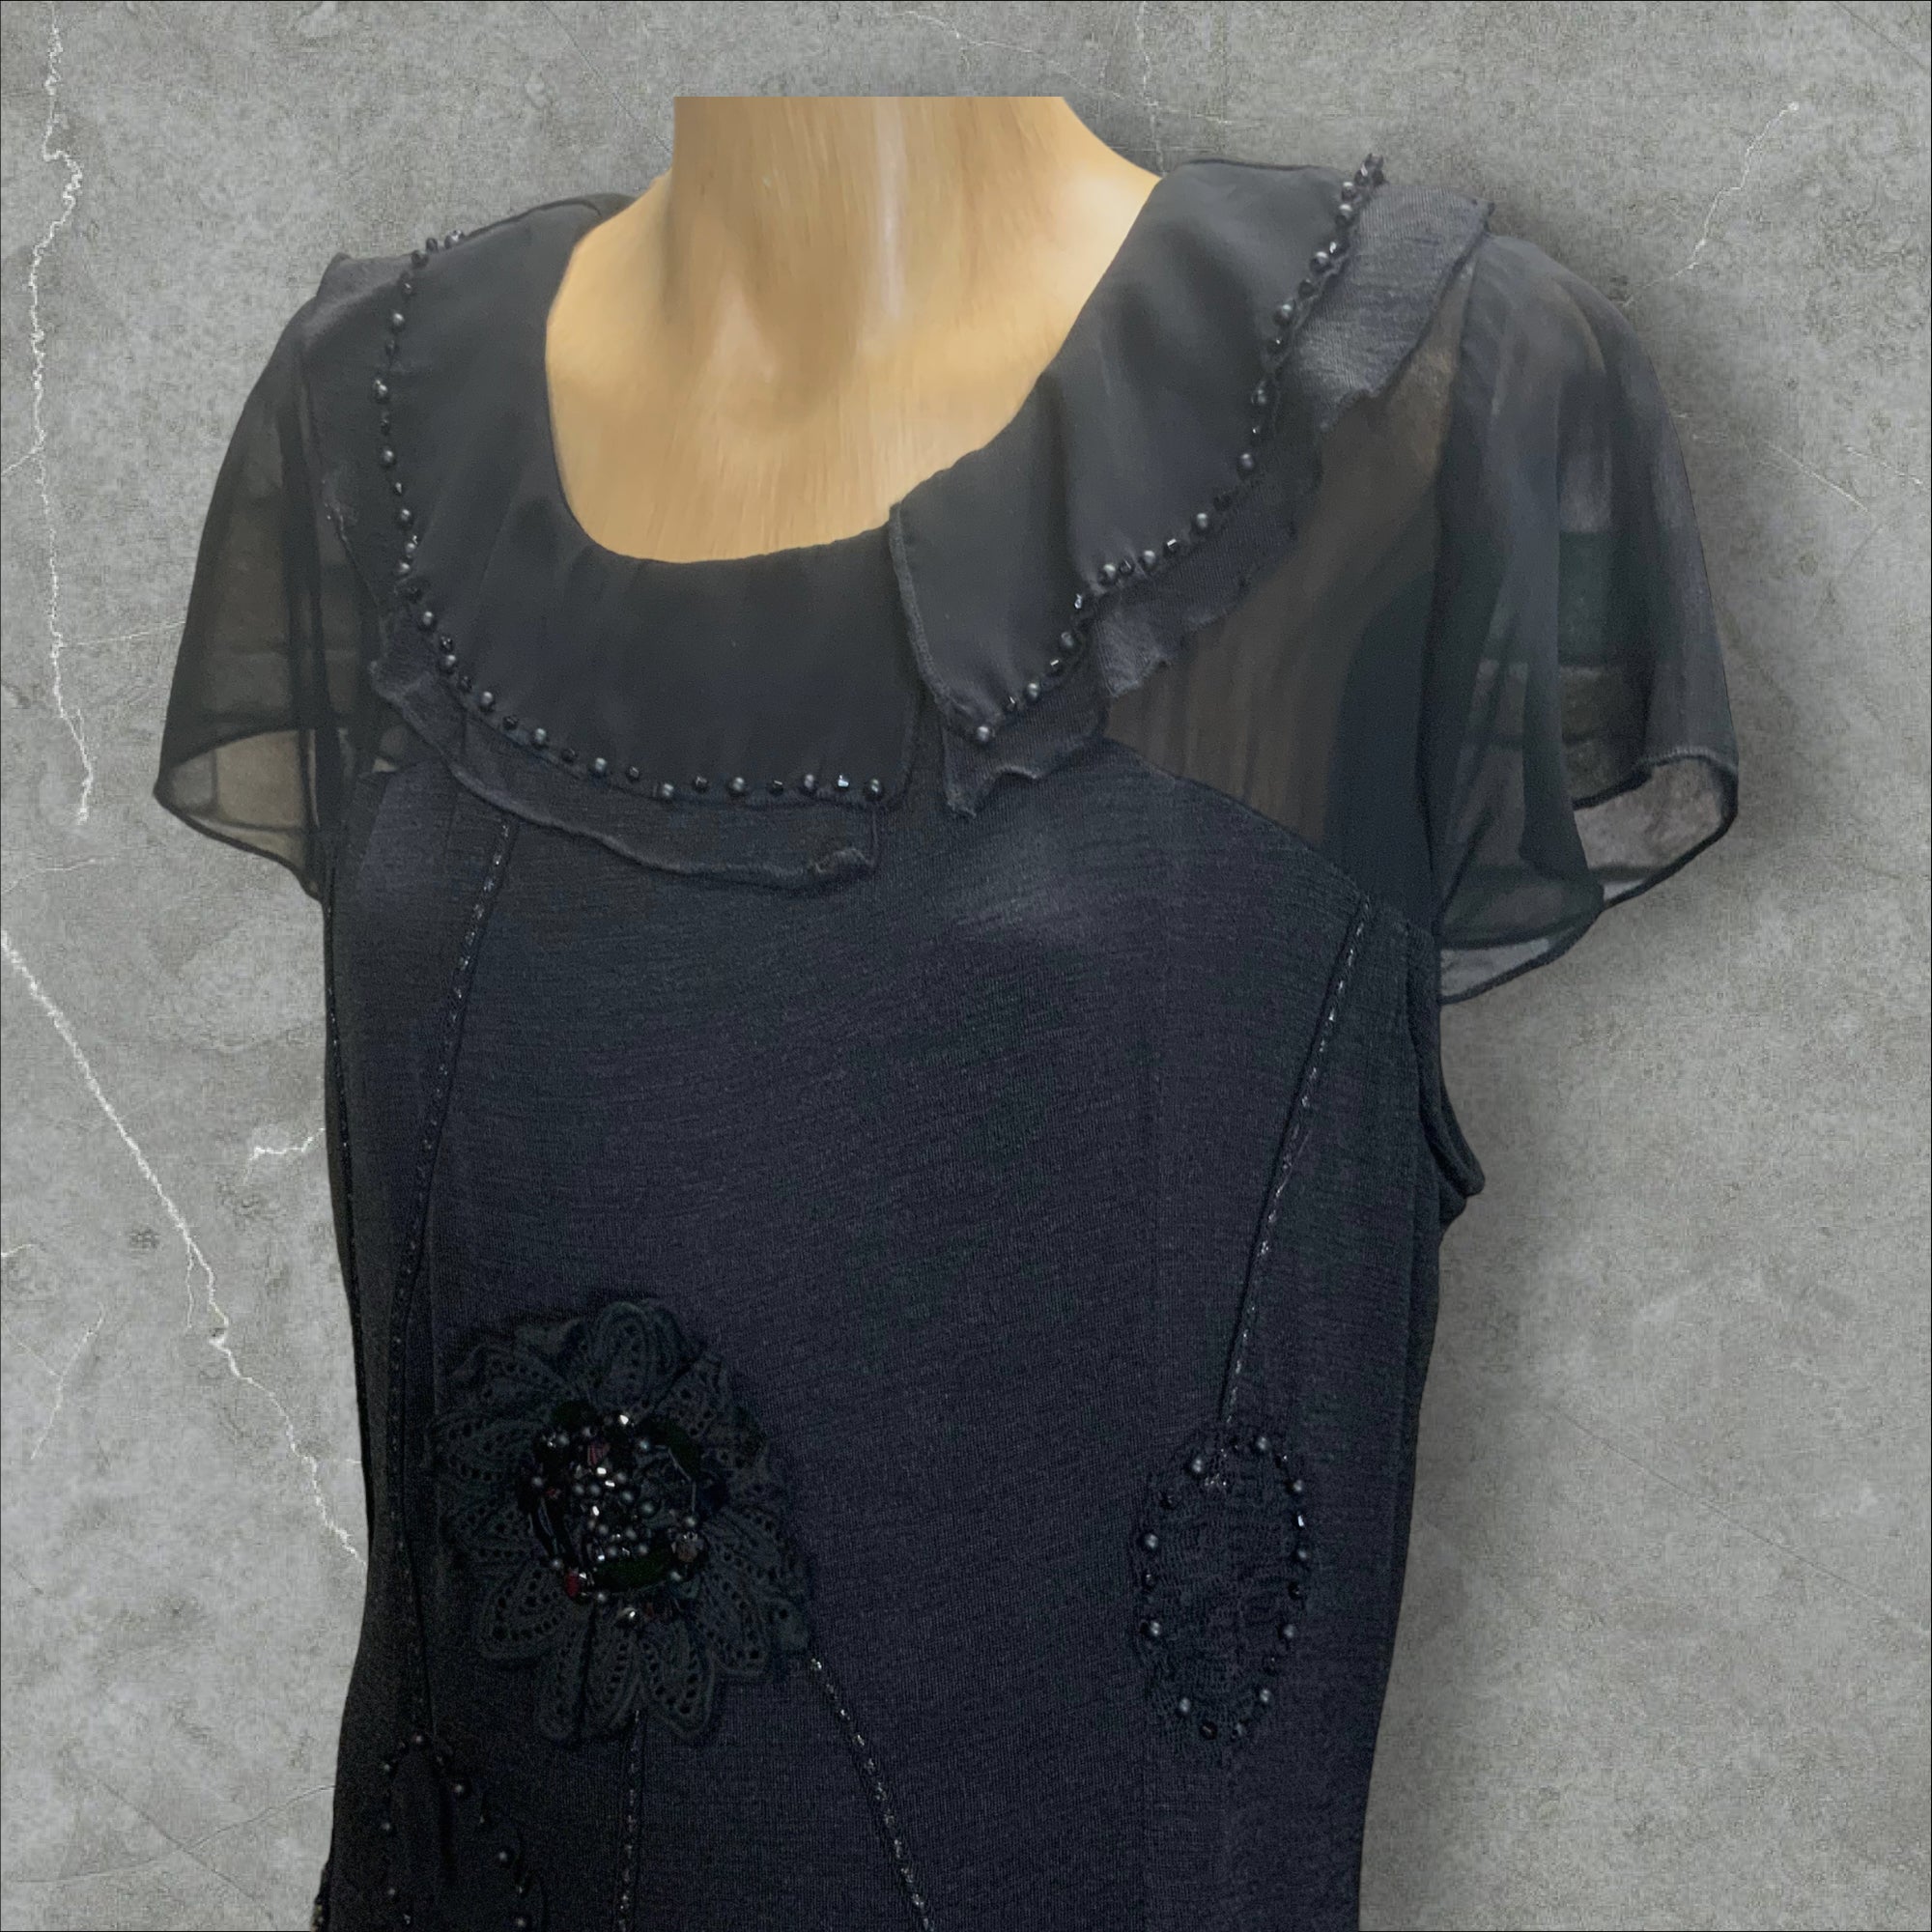 BOO RADLEY Black Cap Sleeved Beaded Floral Tunic Top/Dress - Size L